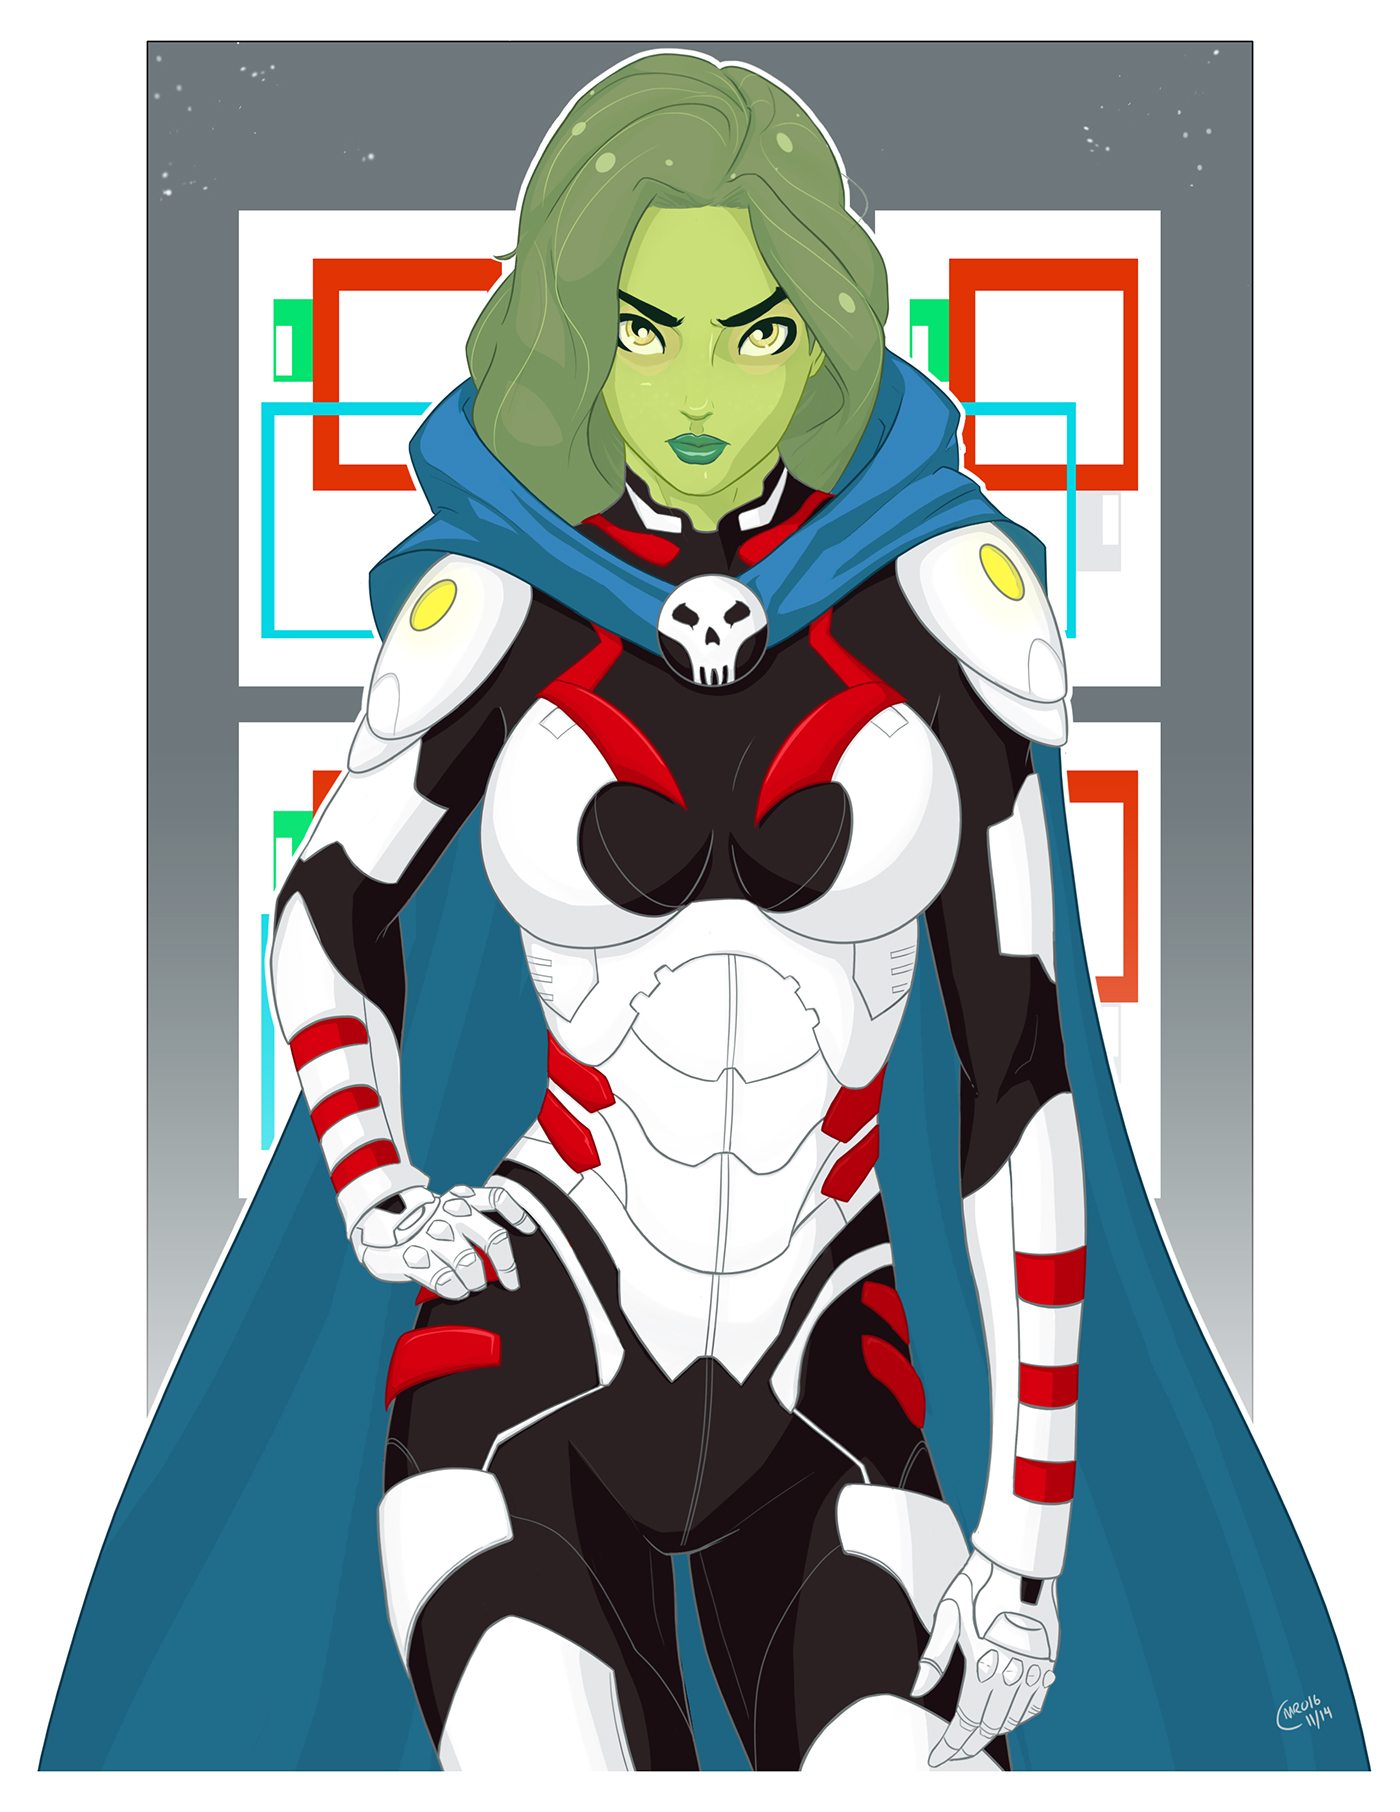 Gamora from Marvel's' Guardians of the Galaxy. 